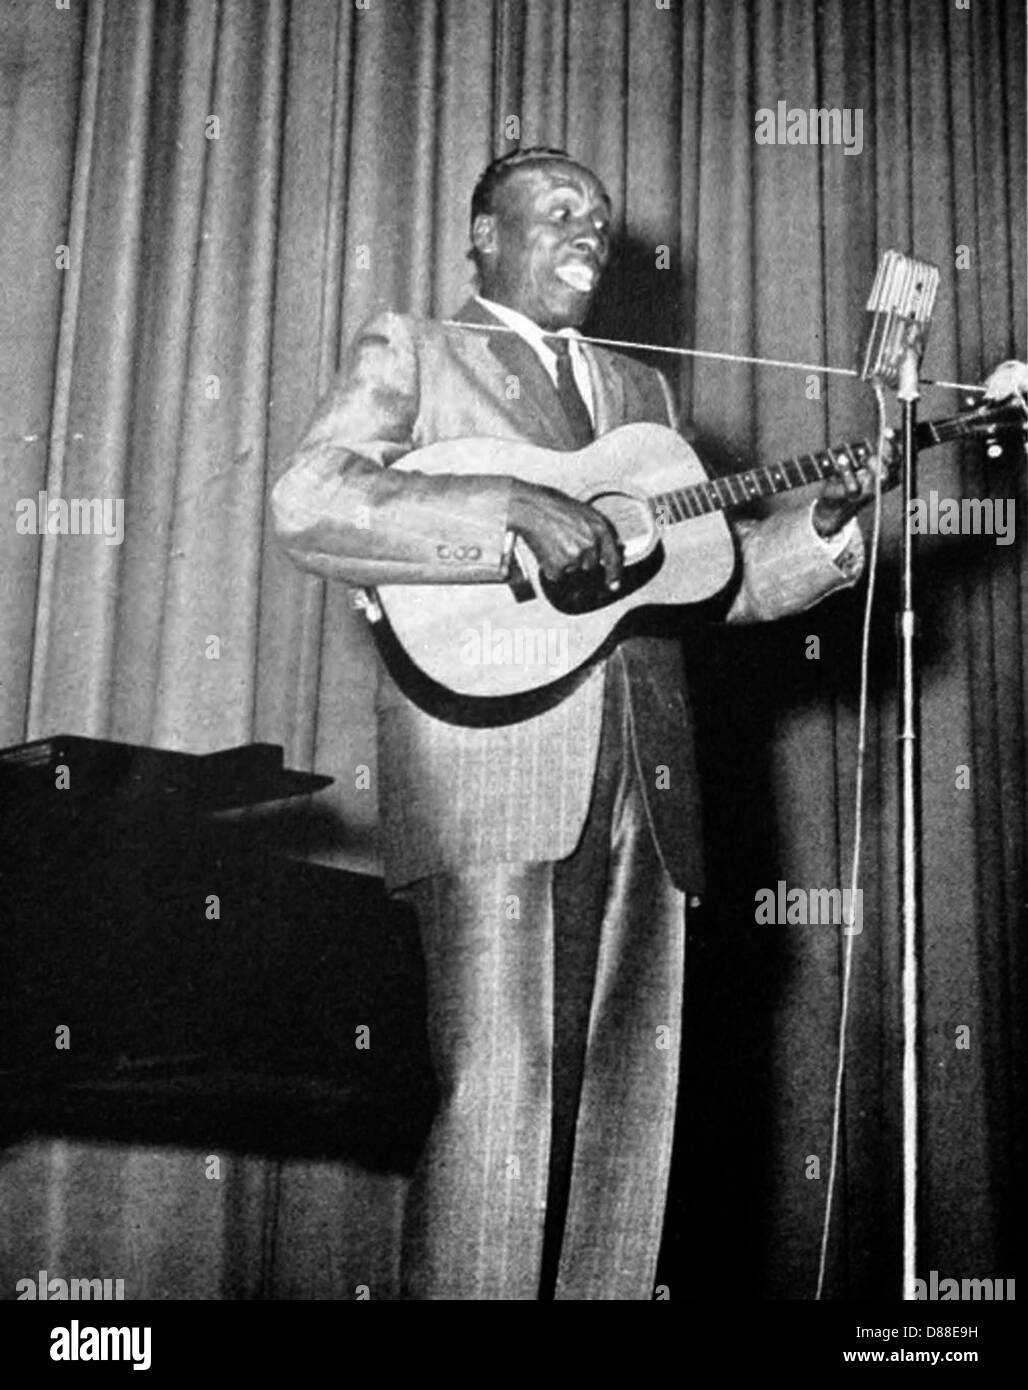 Scatman Crothers - Southern Campus 1960. Stock Photo